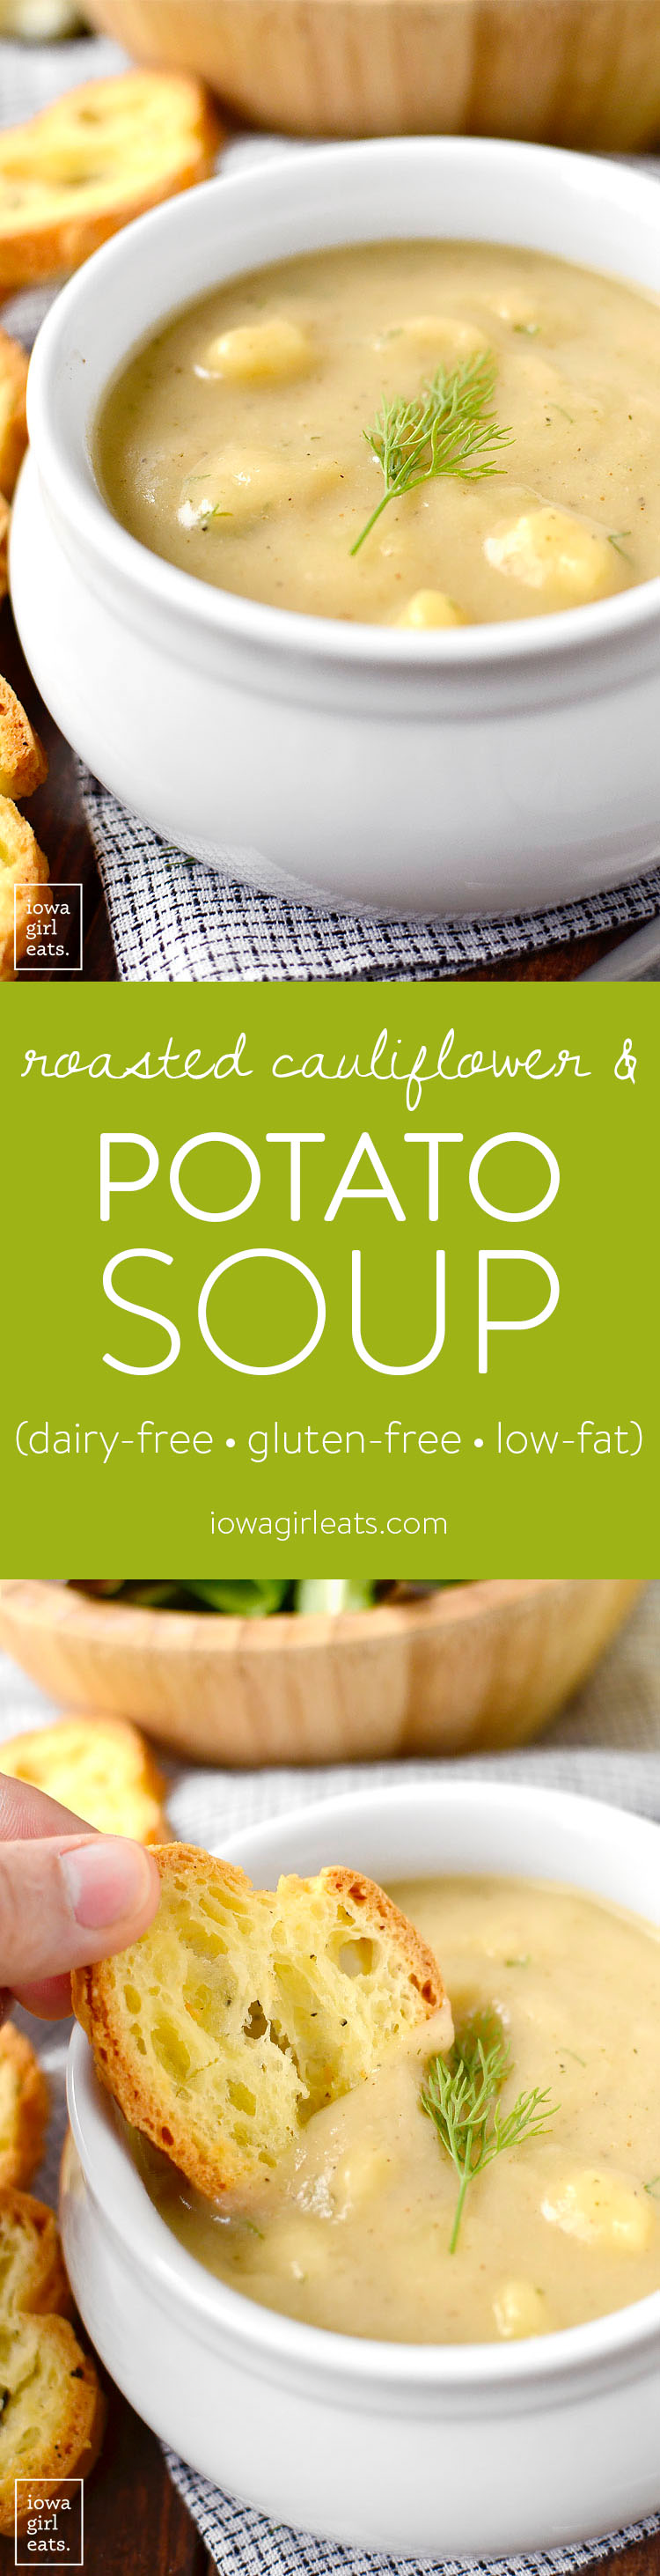 Roasted Cauliflower and Potato Soup is velvety smooth and decadent-tasting yet low-fat, gluten-free, and dairy-free! | iowagirleats.com